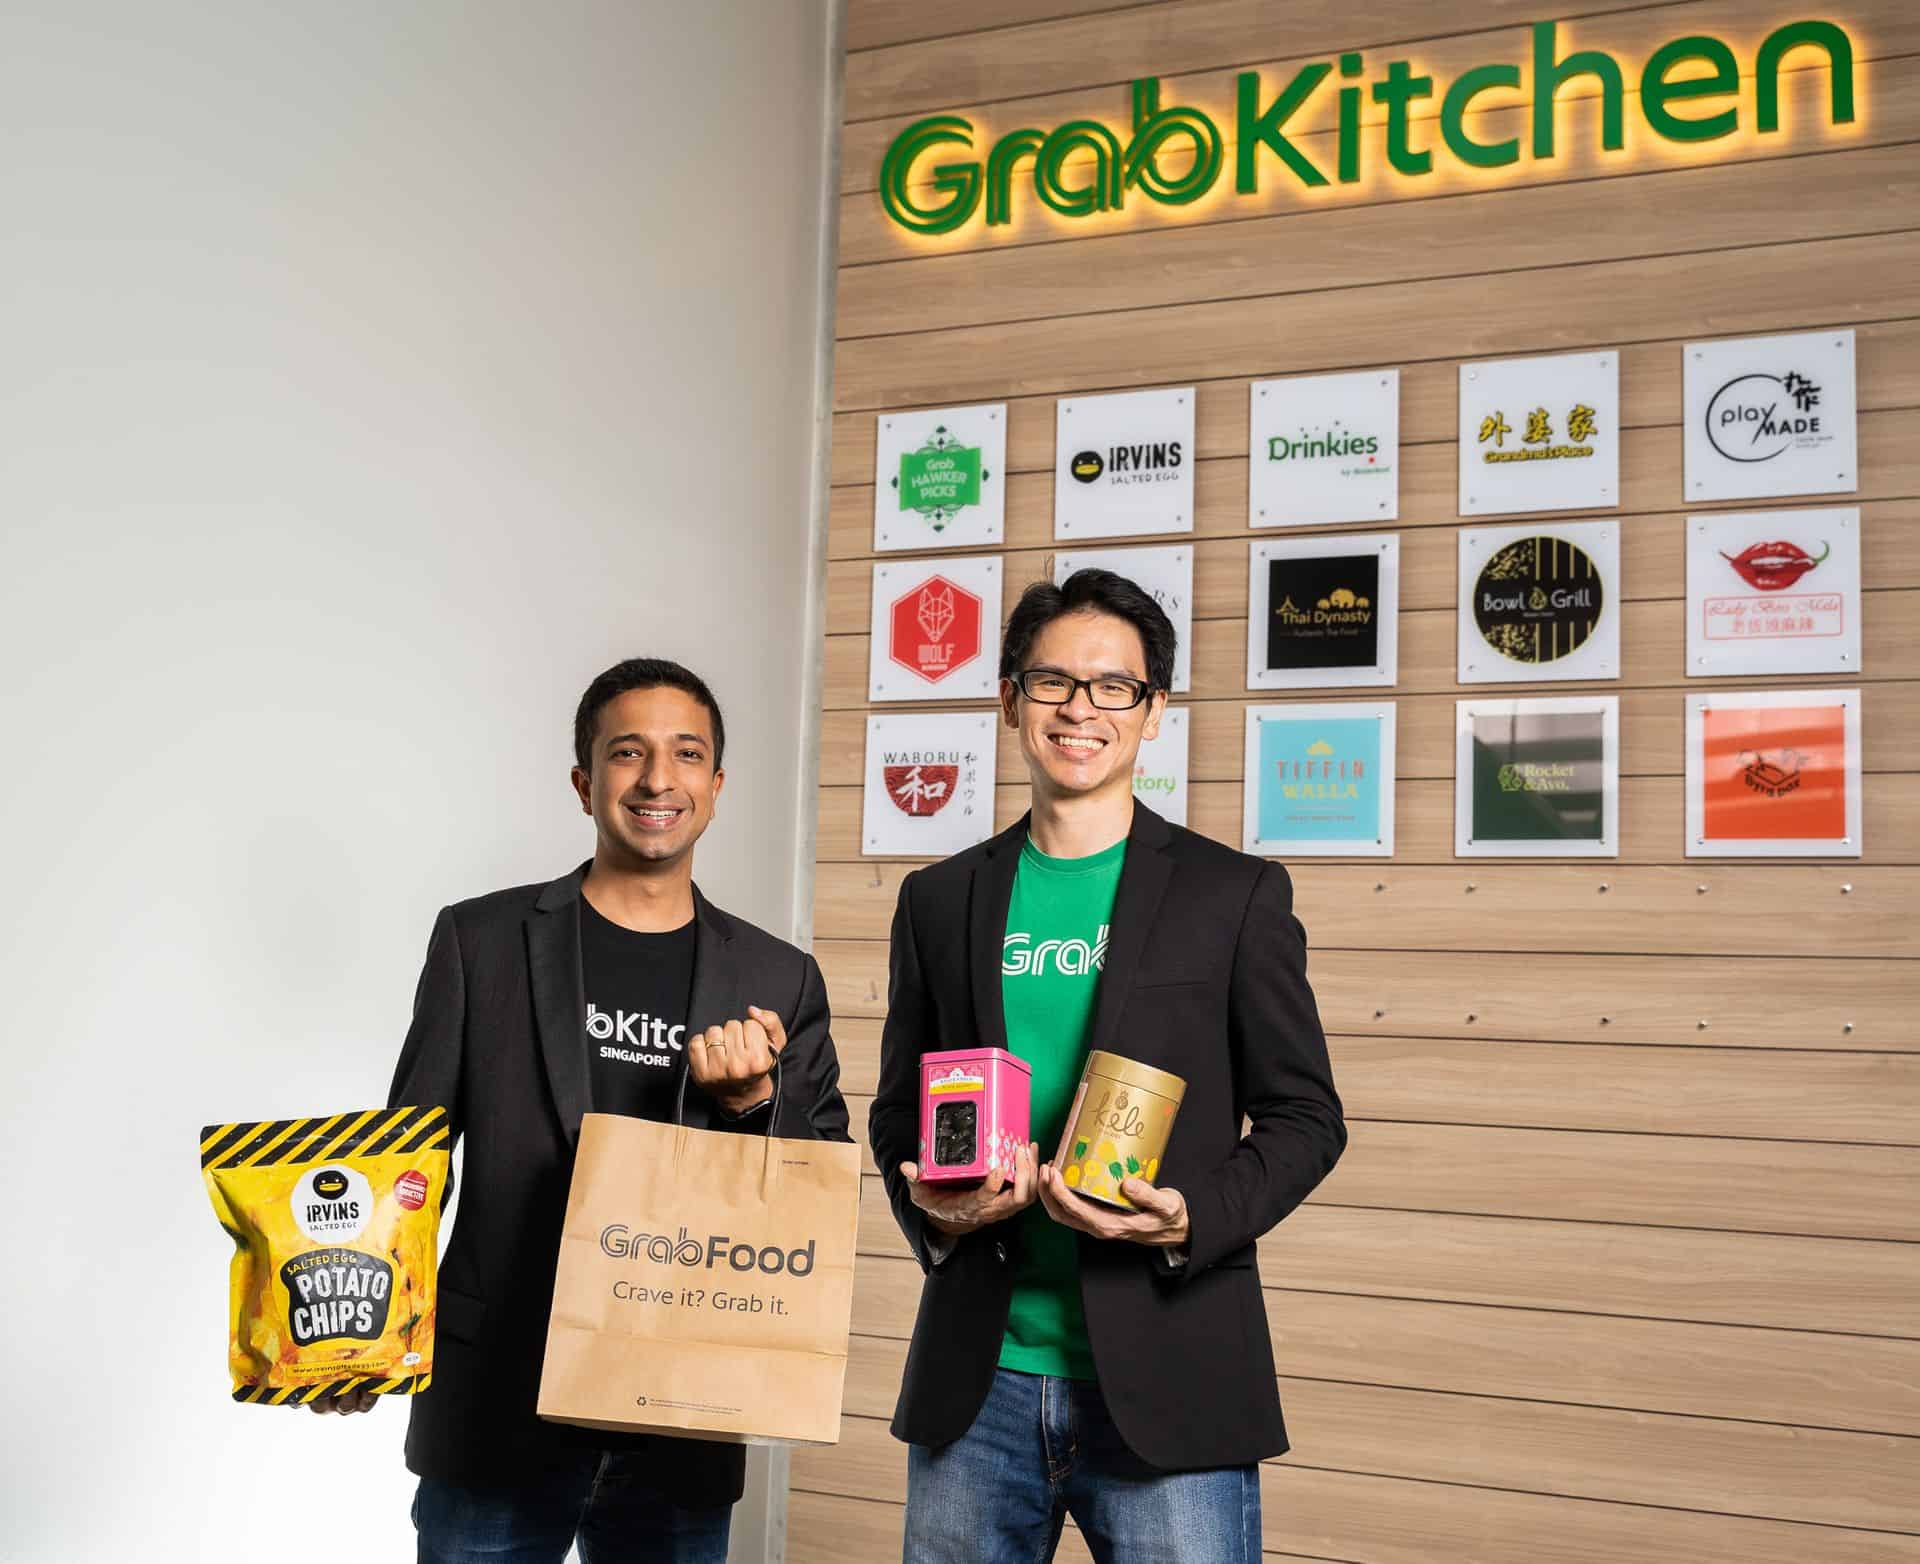 Grabfood Reveals The Launch Of First Grabkitchen In Malaysia Hype Malaysia